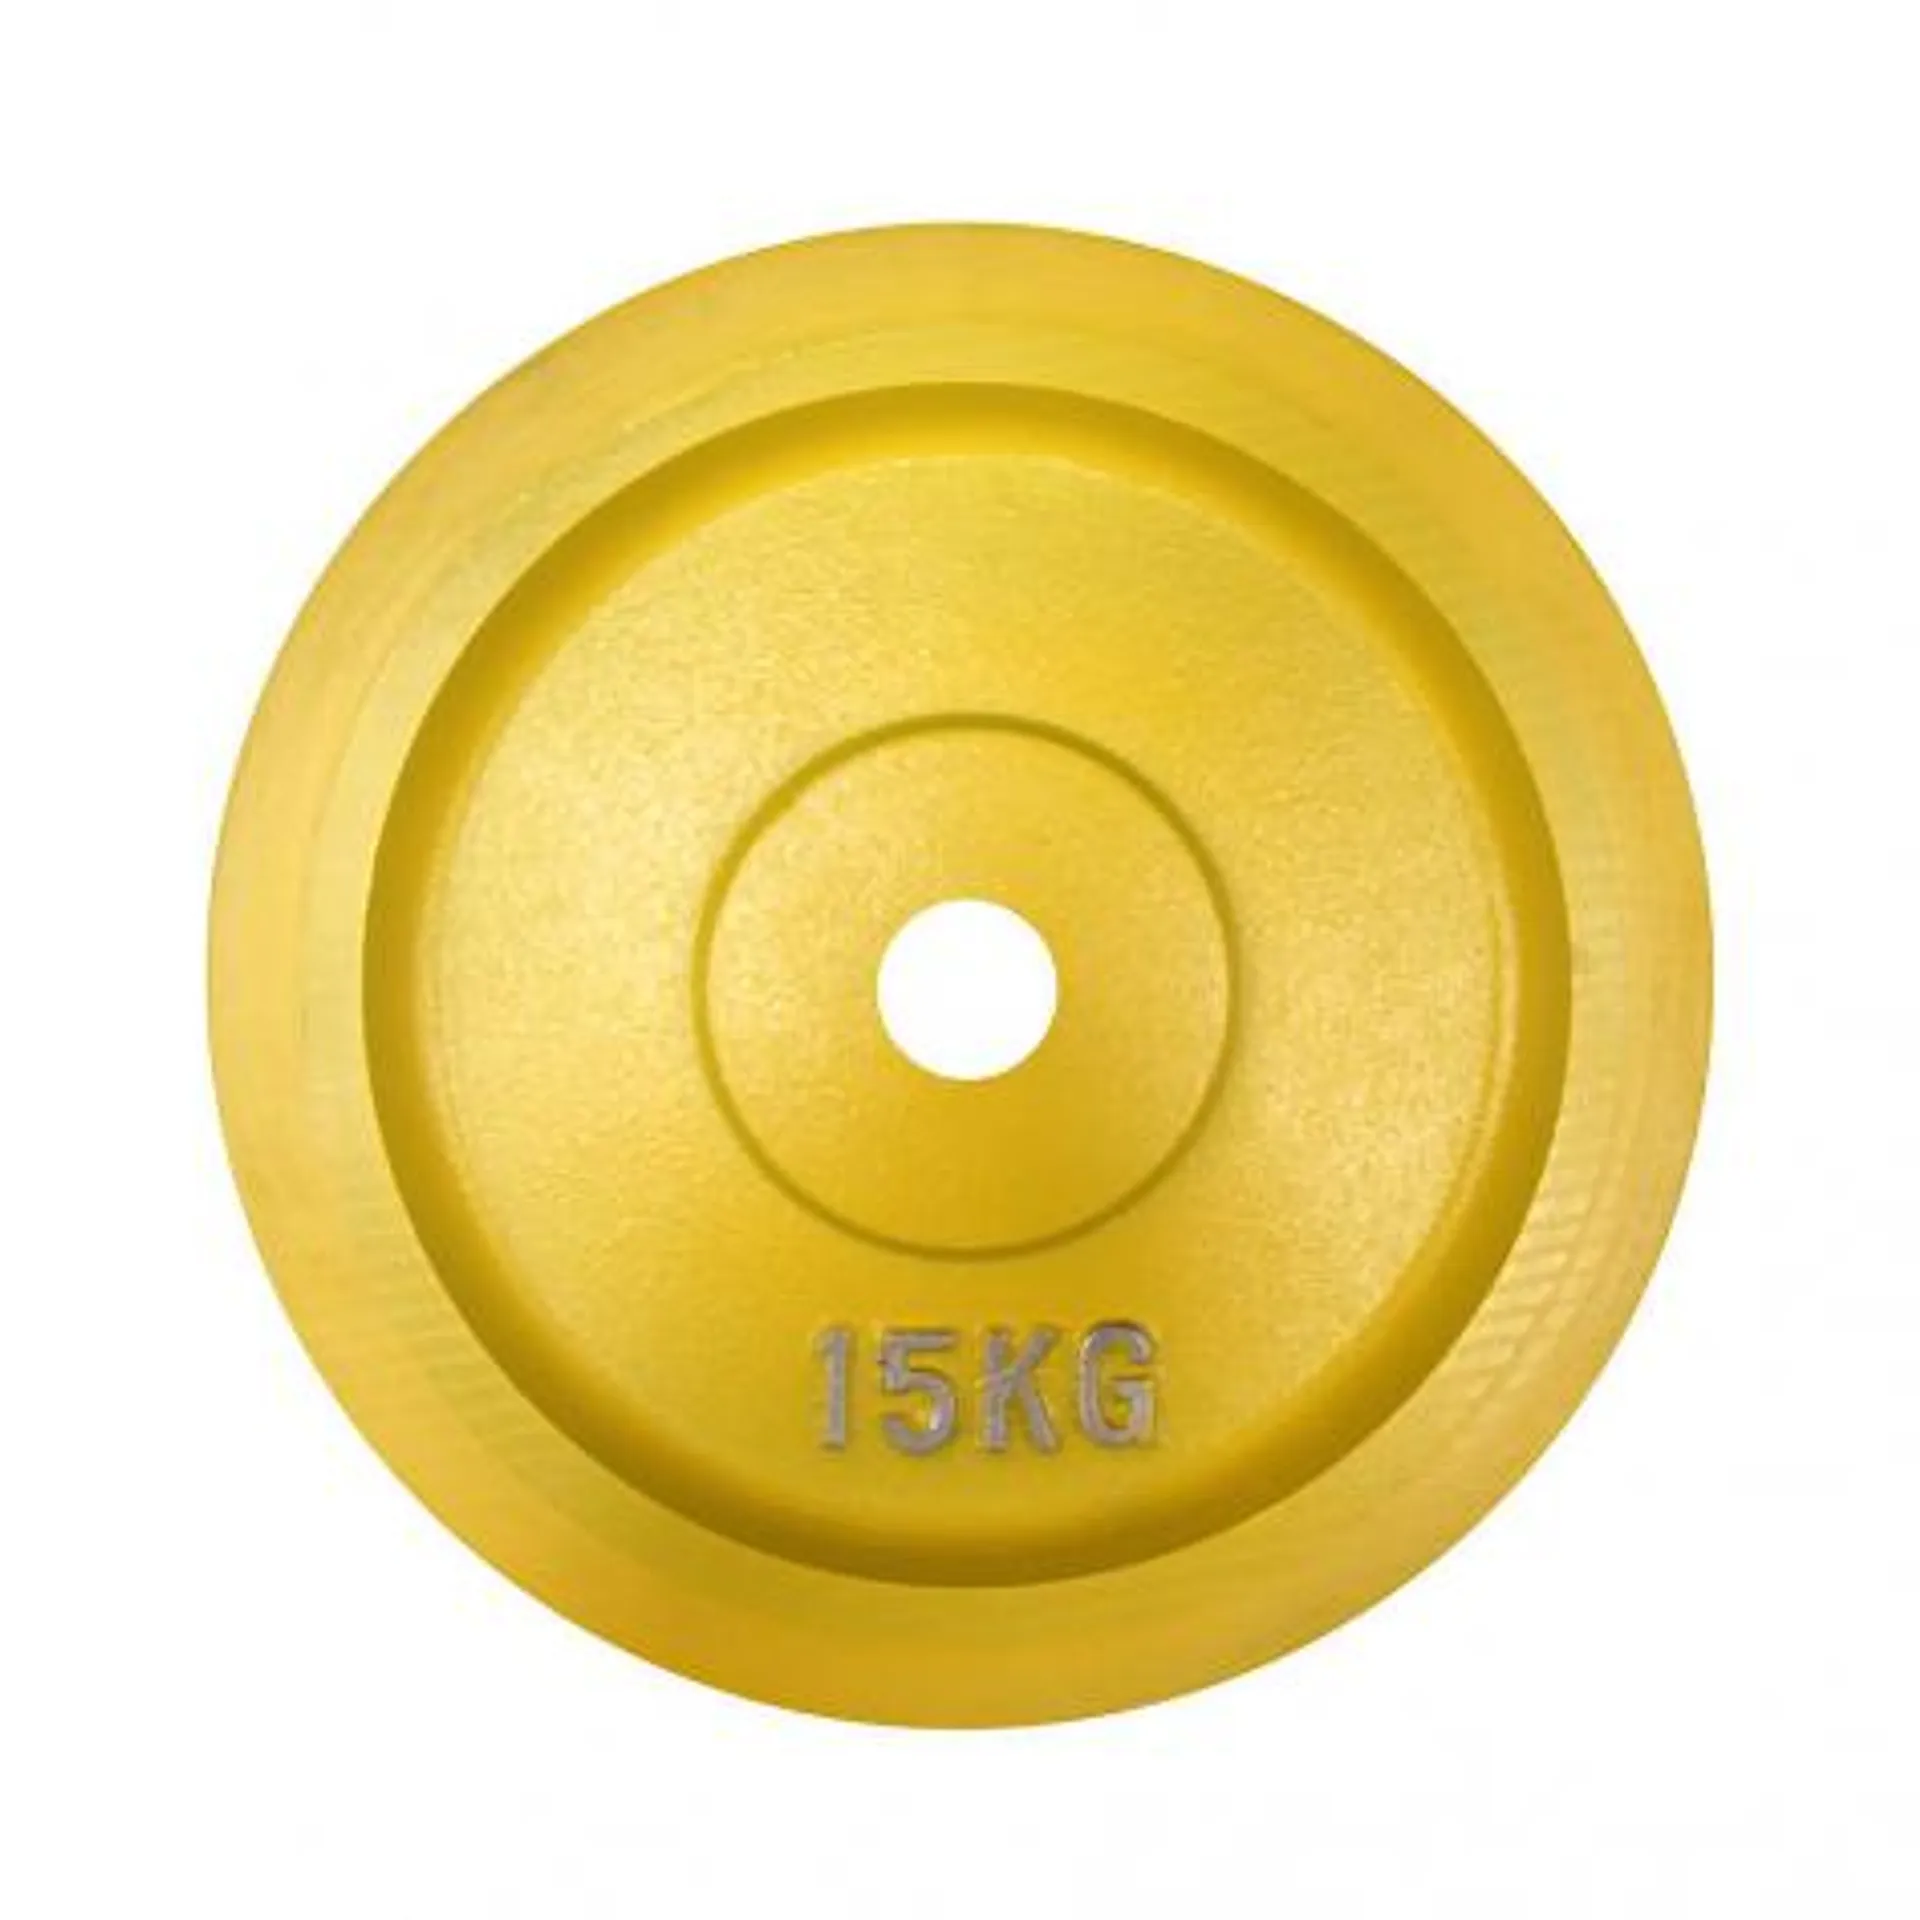 Body Power 15Kg Rubber Edged BUMPER Olympic Discs - Yellow (x2)